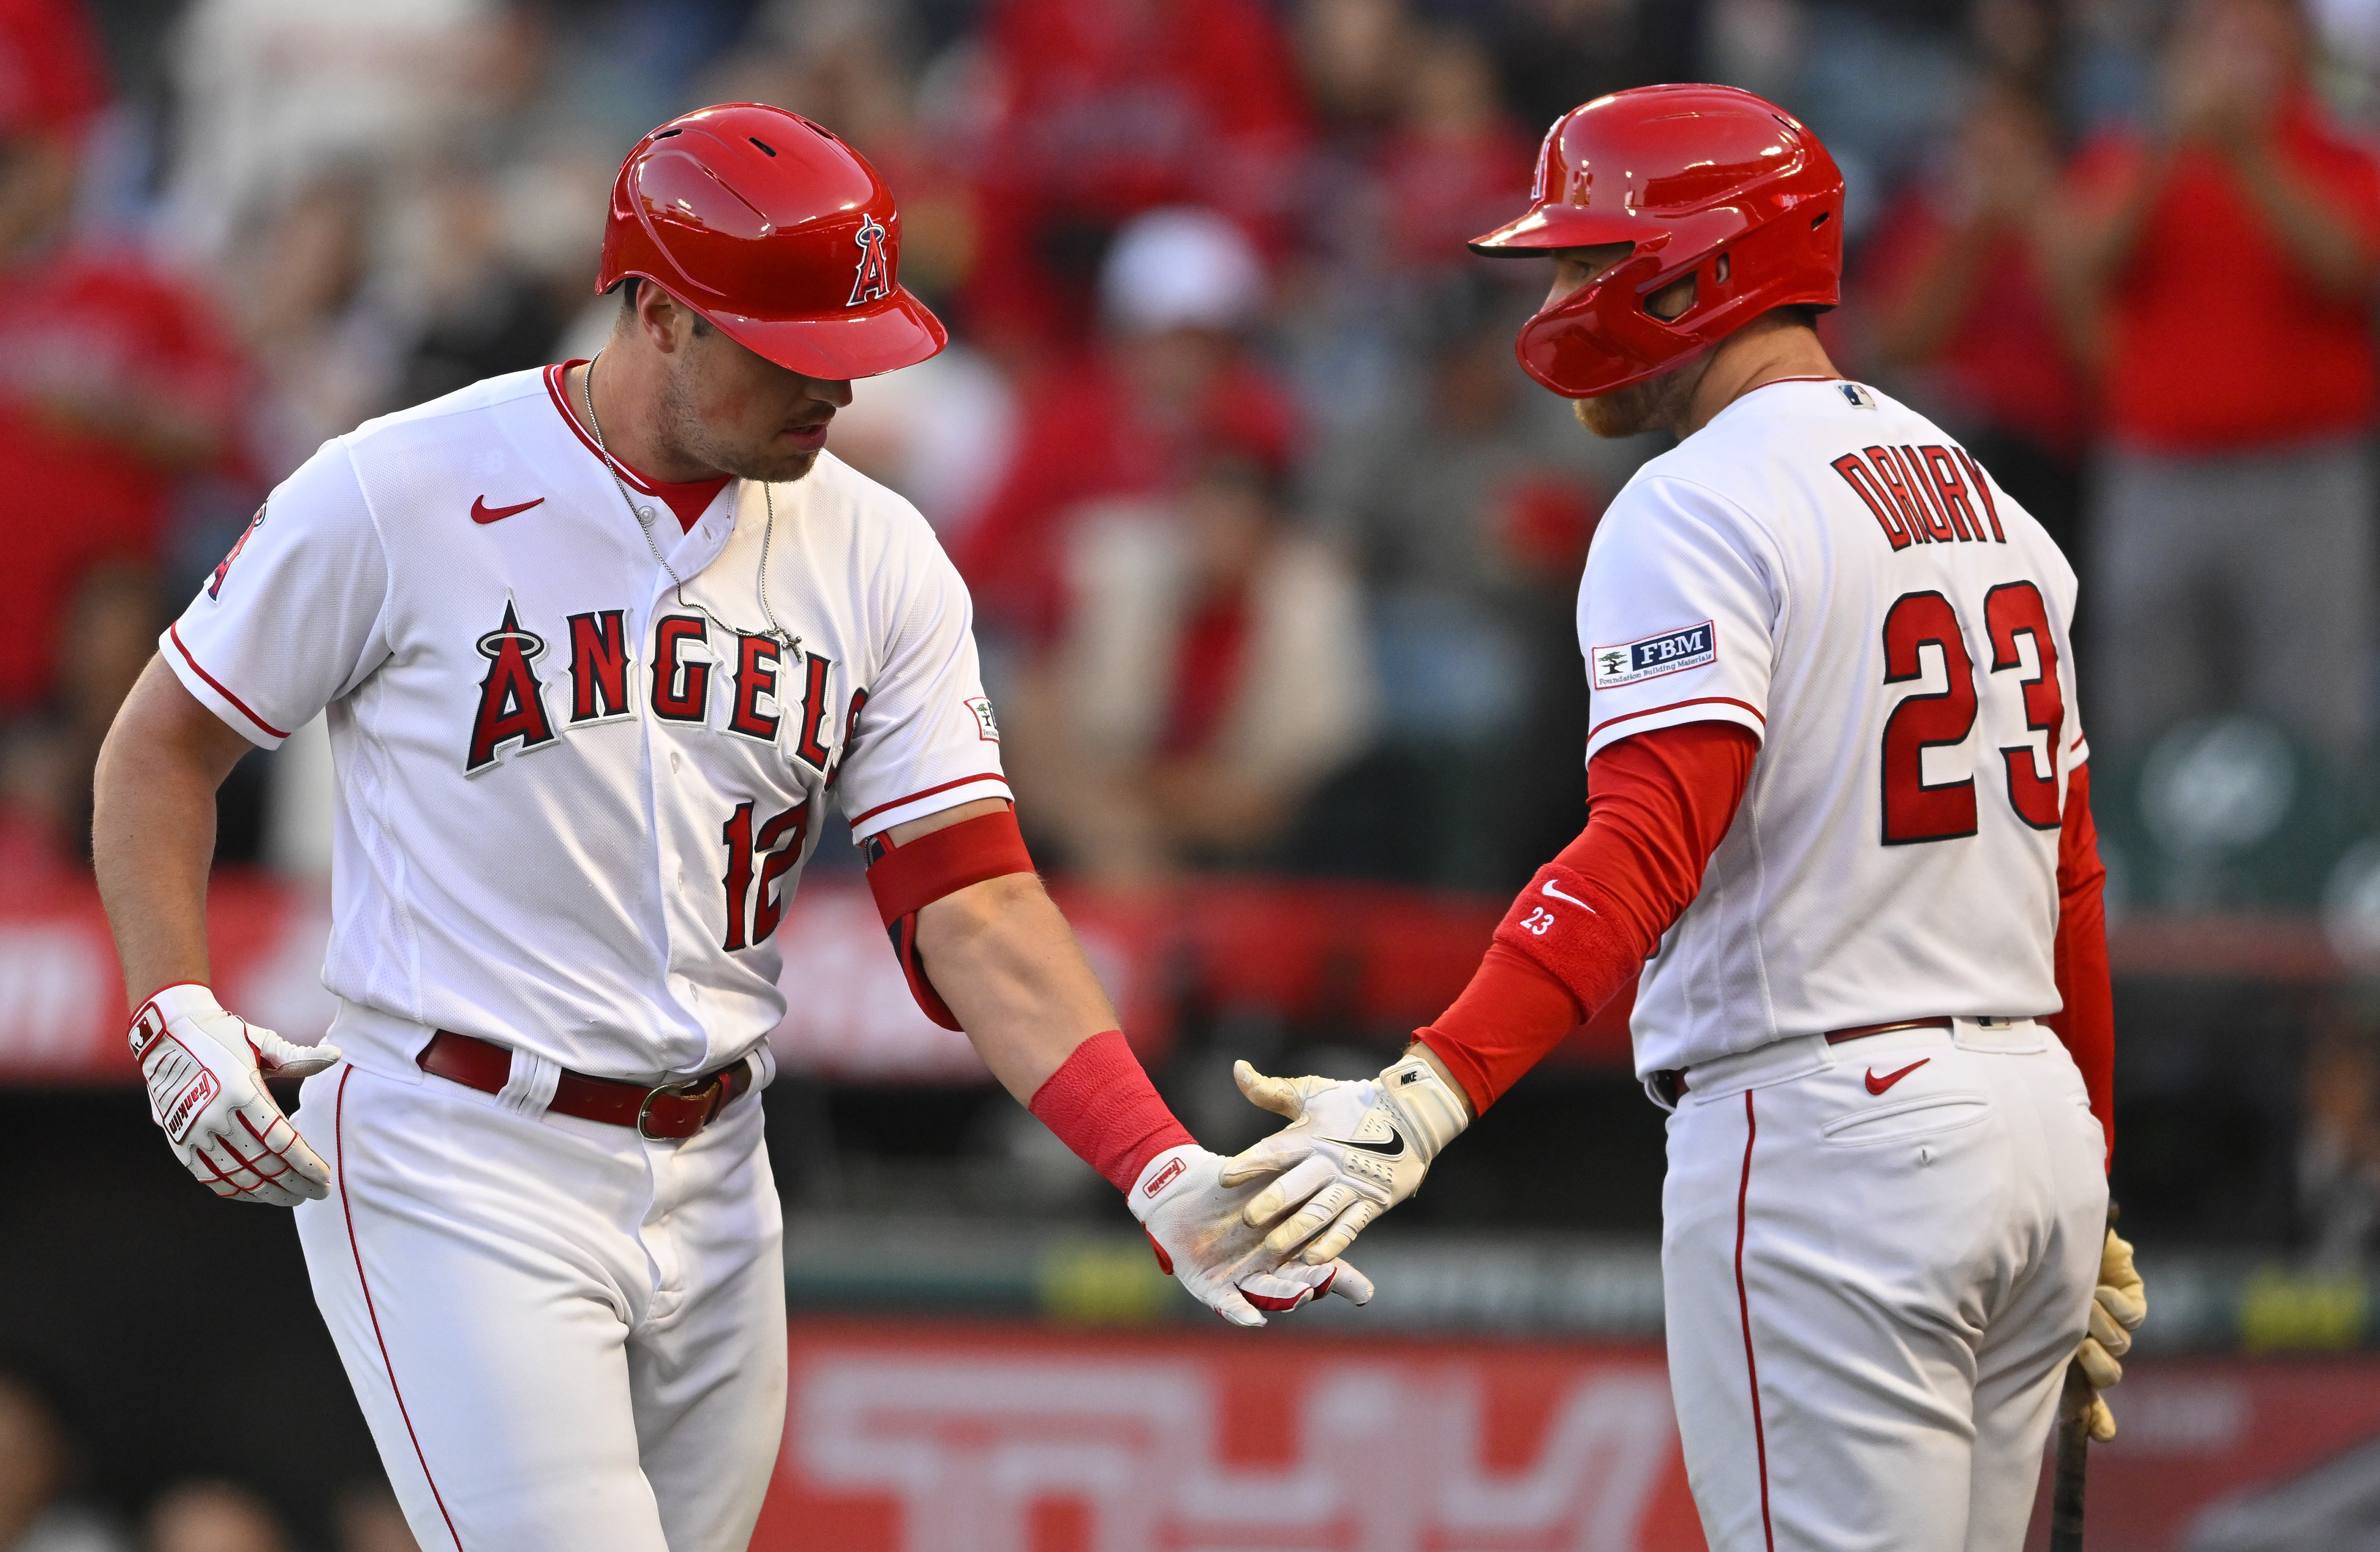 Late rally pushes Angels past Astros